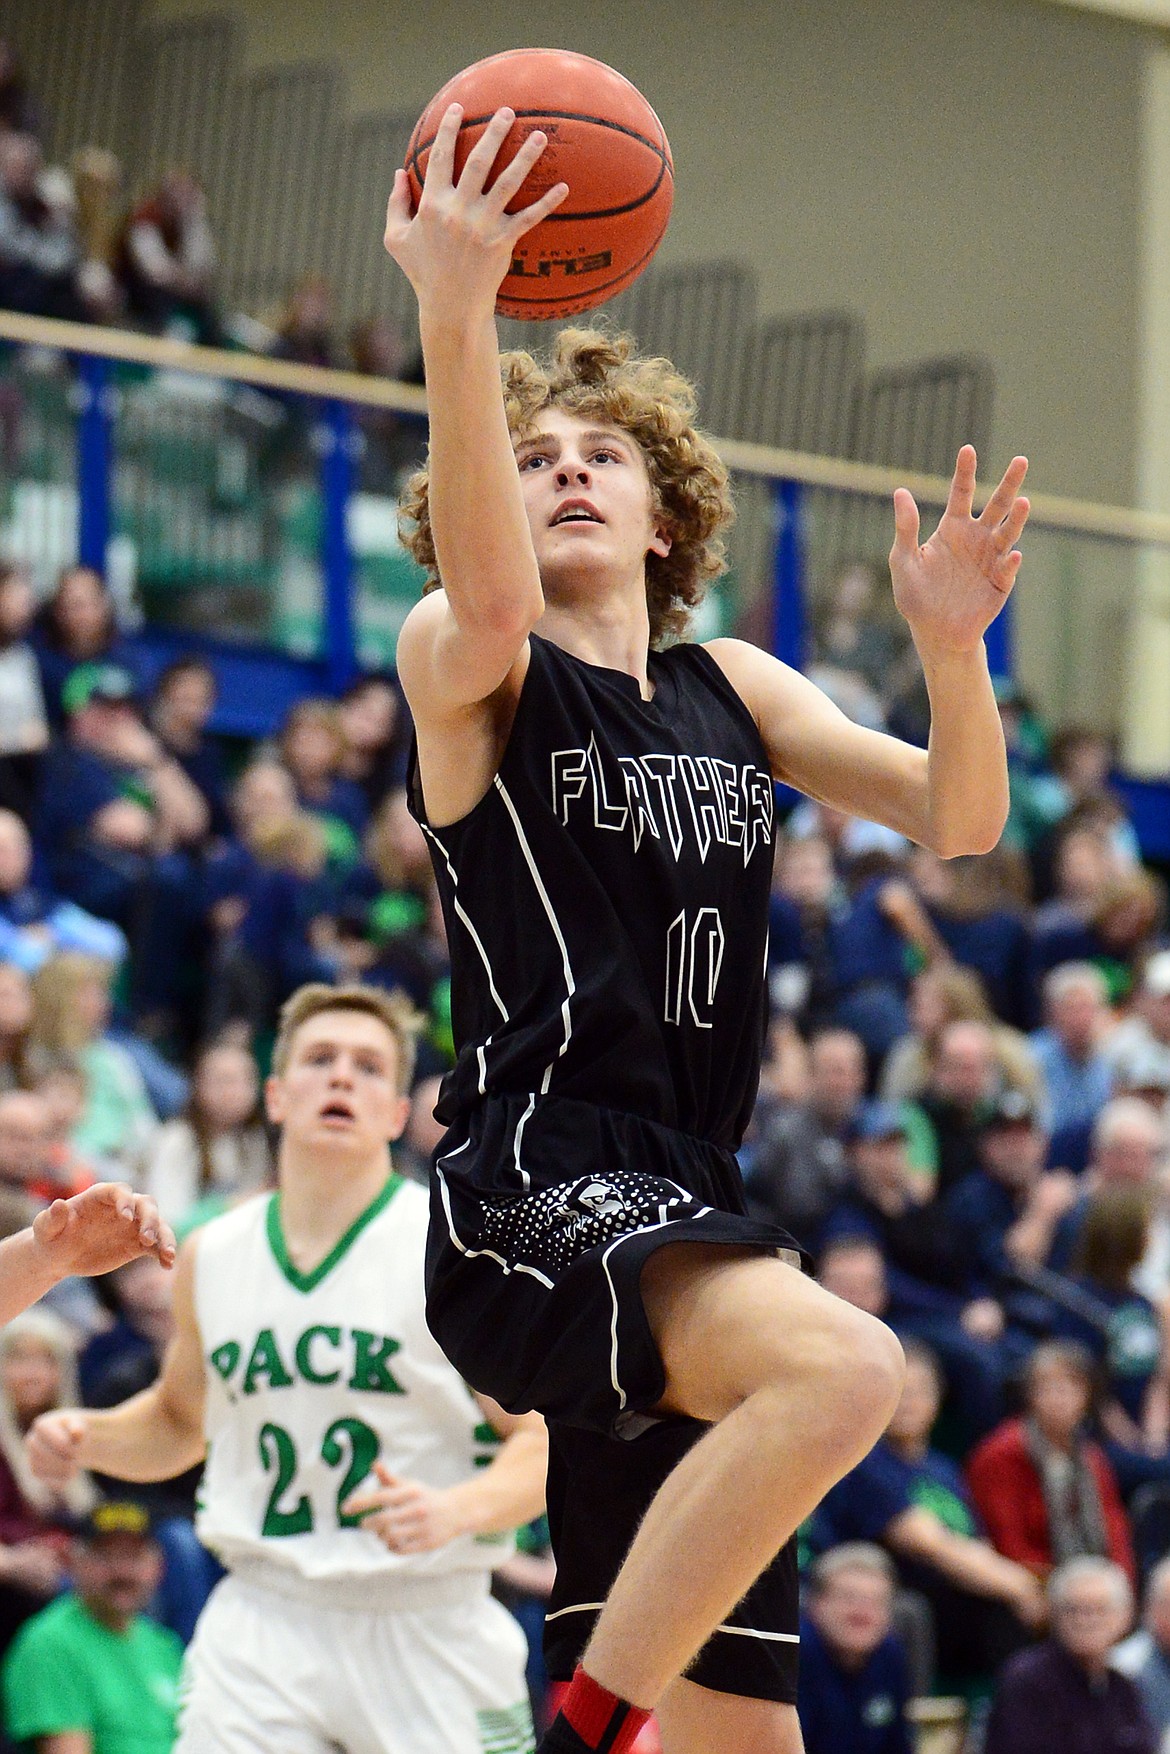 Flathead's Hunter Hickey (10) drives to the basket against Glacier during a crosstown matchup at Glacier High School on Friday. (Casey Kreider/Daily Inter Lake)